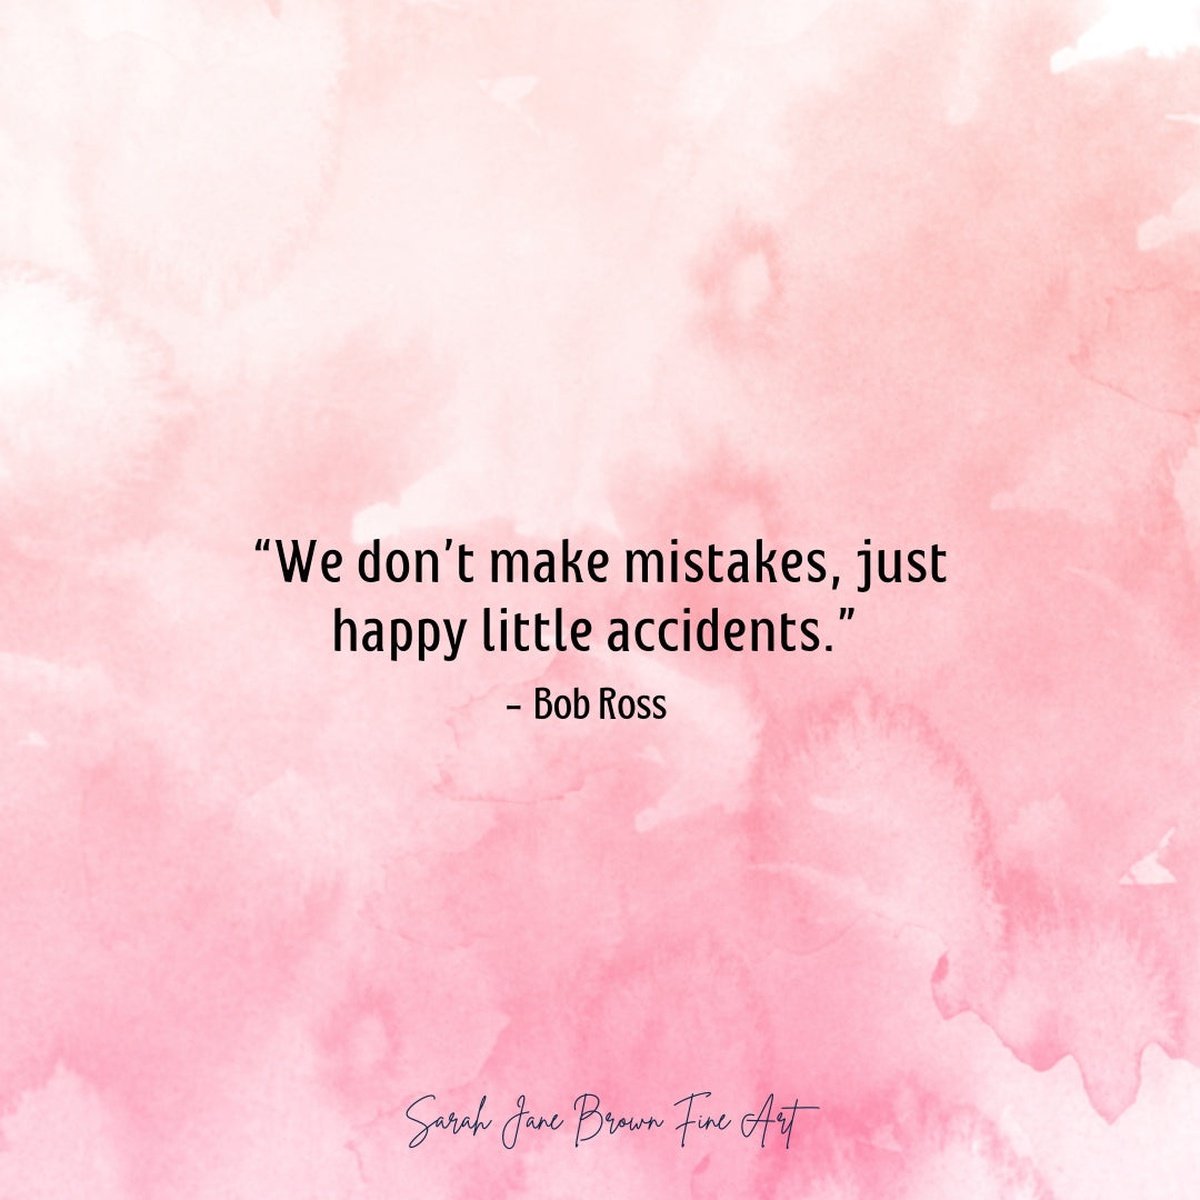 Quote of the day: Bob Ross